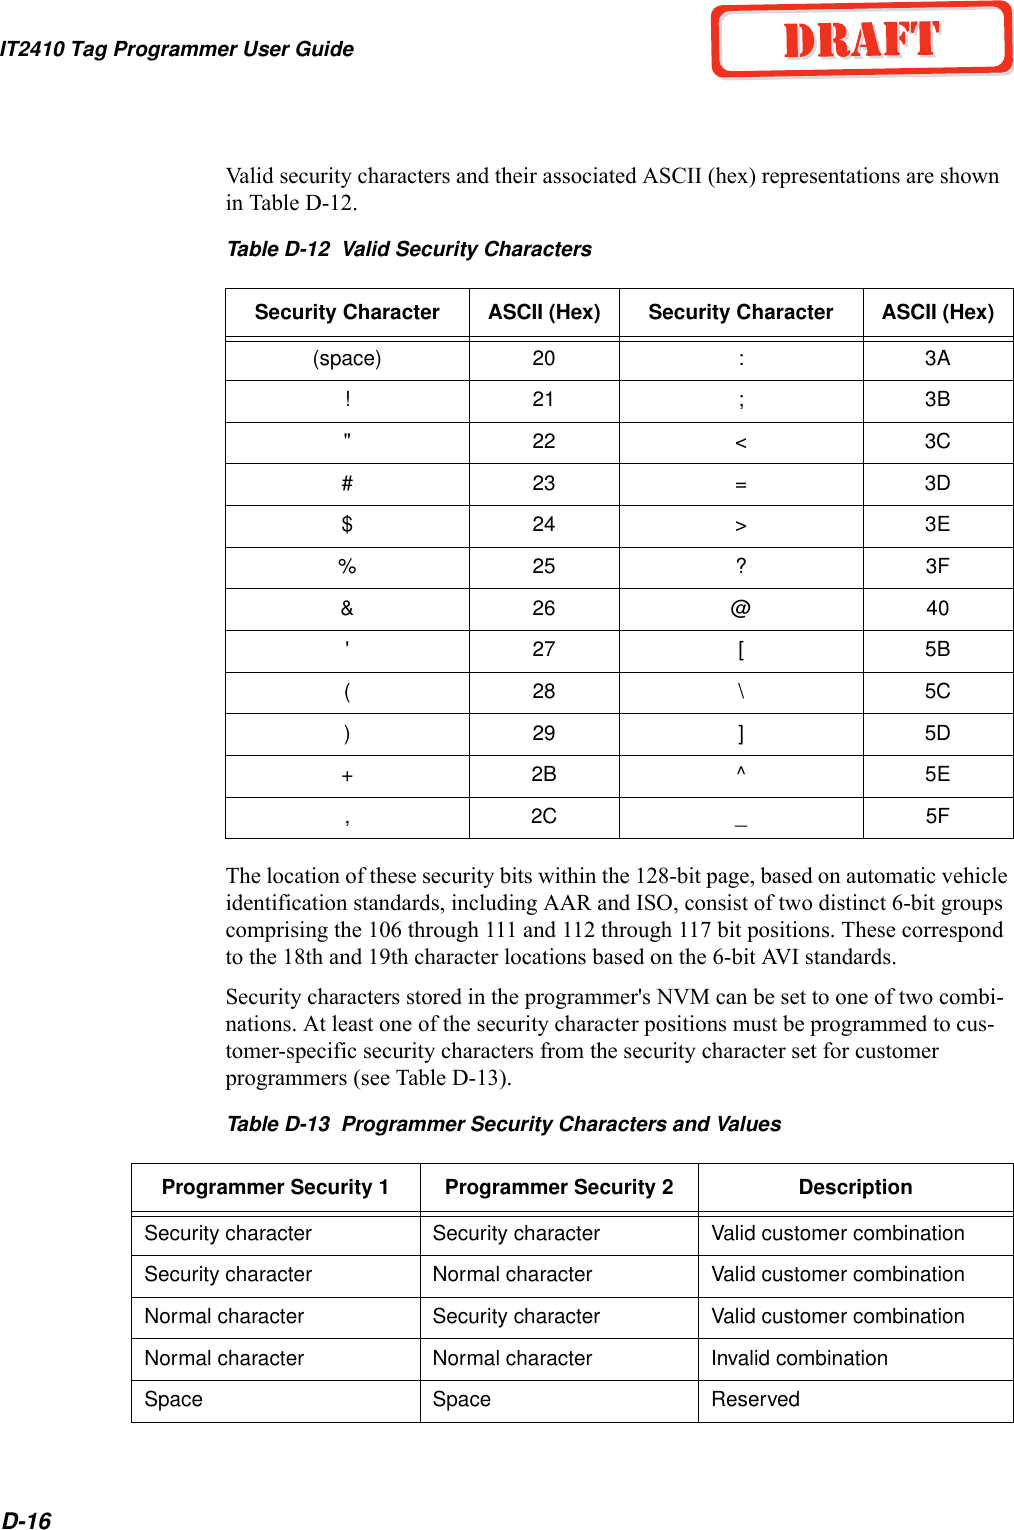 IT2410 Tag Programmer User GuideD-16Valid security characters and their associated ASCII (hex) representations are shown in Table D-12.Table D-12  Valid Security CharactersThe location of these security bits within the 128-bit page, based on automatic vehicle identification standards, including AAR and ISO, consist of two distinct 6-bit groups comprising the 106 through 111 and 112 through 117 bit positions. These correspond to the 18th and 19th character locations based on the 6-bit AVI standards.Security characters stored in the programmer&apos;s NVM can be set to one of two combi-nations. At least one of the security character positions must be programmed to cus-tomer-specific security characters from the security character set for customer programmers (see Table D-13).Table D-13  Programmer Security Characters and ValuesSecurity Character ASCII (Hex) Security Character ASCII (Hex)(space) 20 :3A!21 ;3B&quot;22 &lt;3C#23 =3D$24 &gt;3E%25 ?3F&amp;26 @40&apos;27 [5B(28 \5C)29 ]5D+2B ^5E,2C _5FProgrammer Security 1 Programmer Security 2 DescriptionSecurity character  Security character Valid customer combinationSecurity character Normal character Valid customer combinationNormal character Security character Valid customer combinationNormal character Normal character Invalid combinationSpace Space Reserved